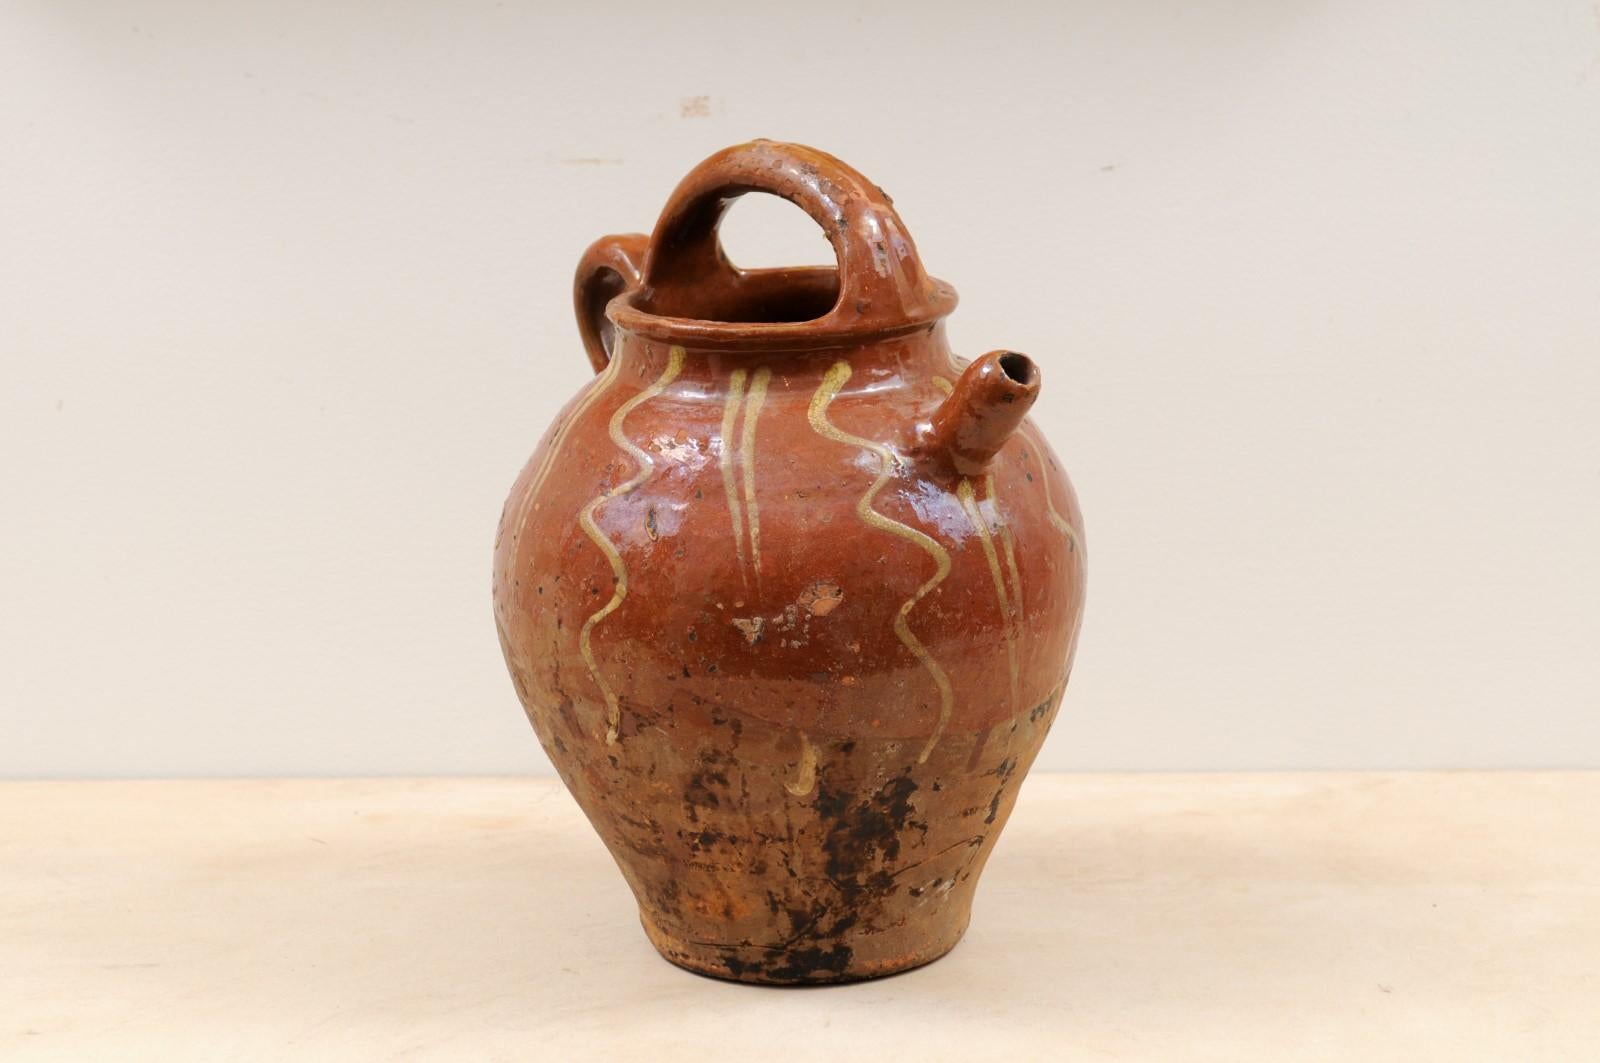 A rustic French glazed terracotta oil jug from the 19th century, with wavy lines and nicely distressed appearance. Created in France during the 19th century, this glazed terracotta pottery piece features a brown circular body accented with golden